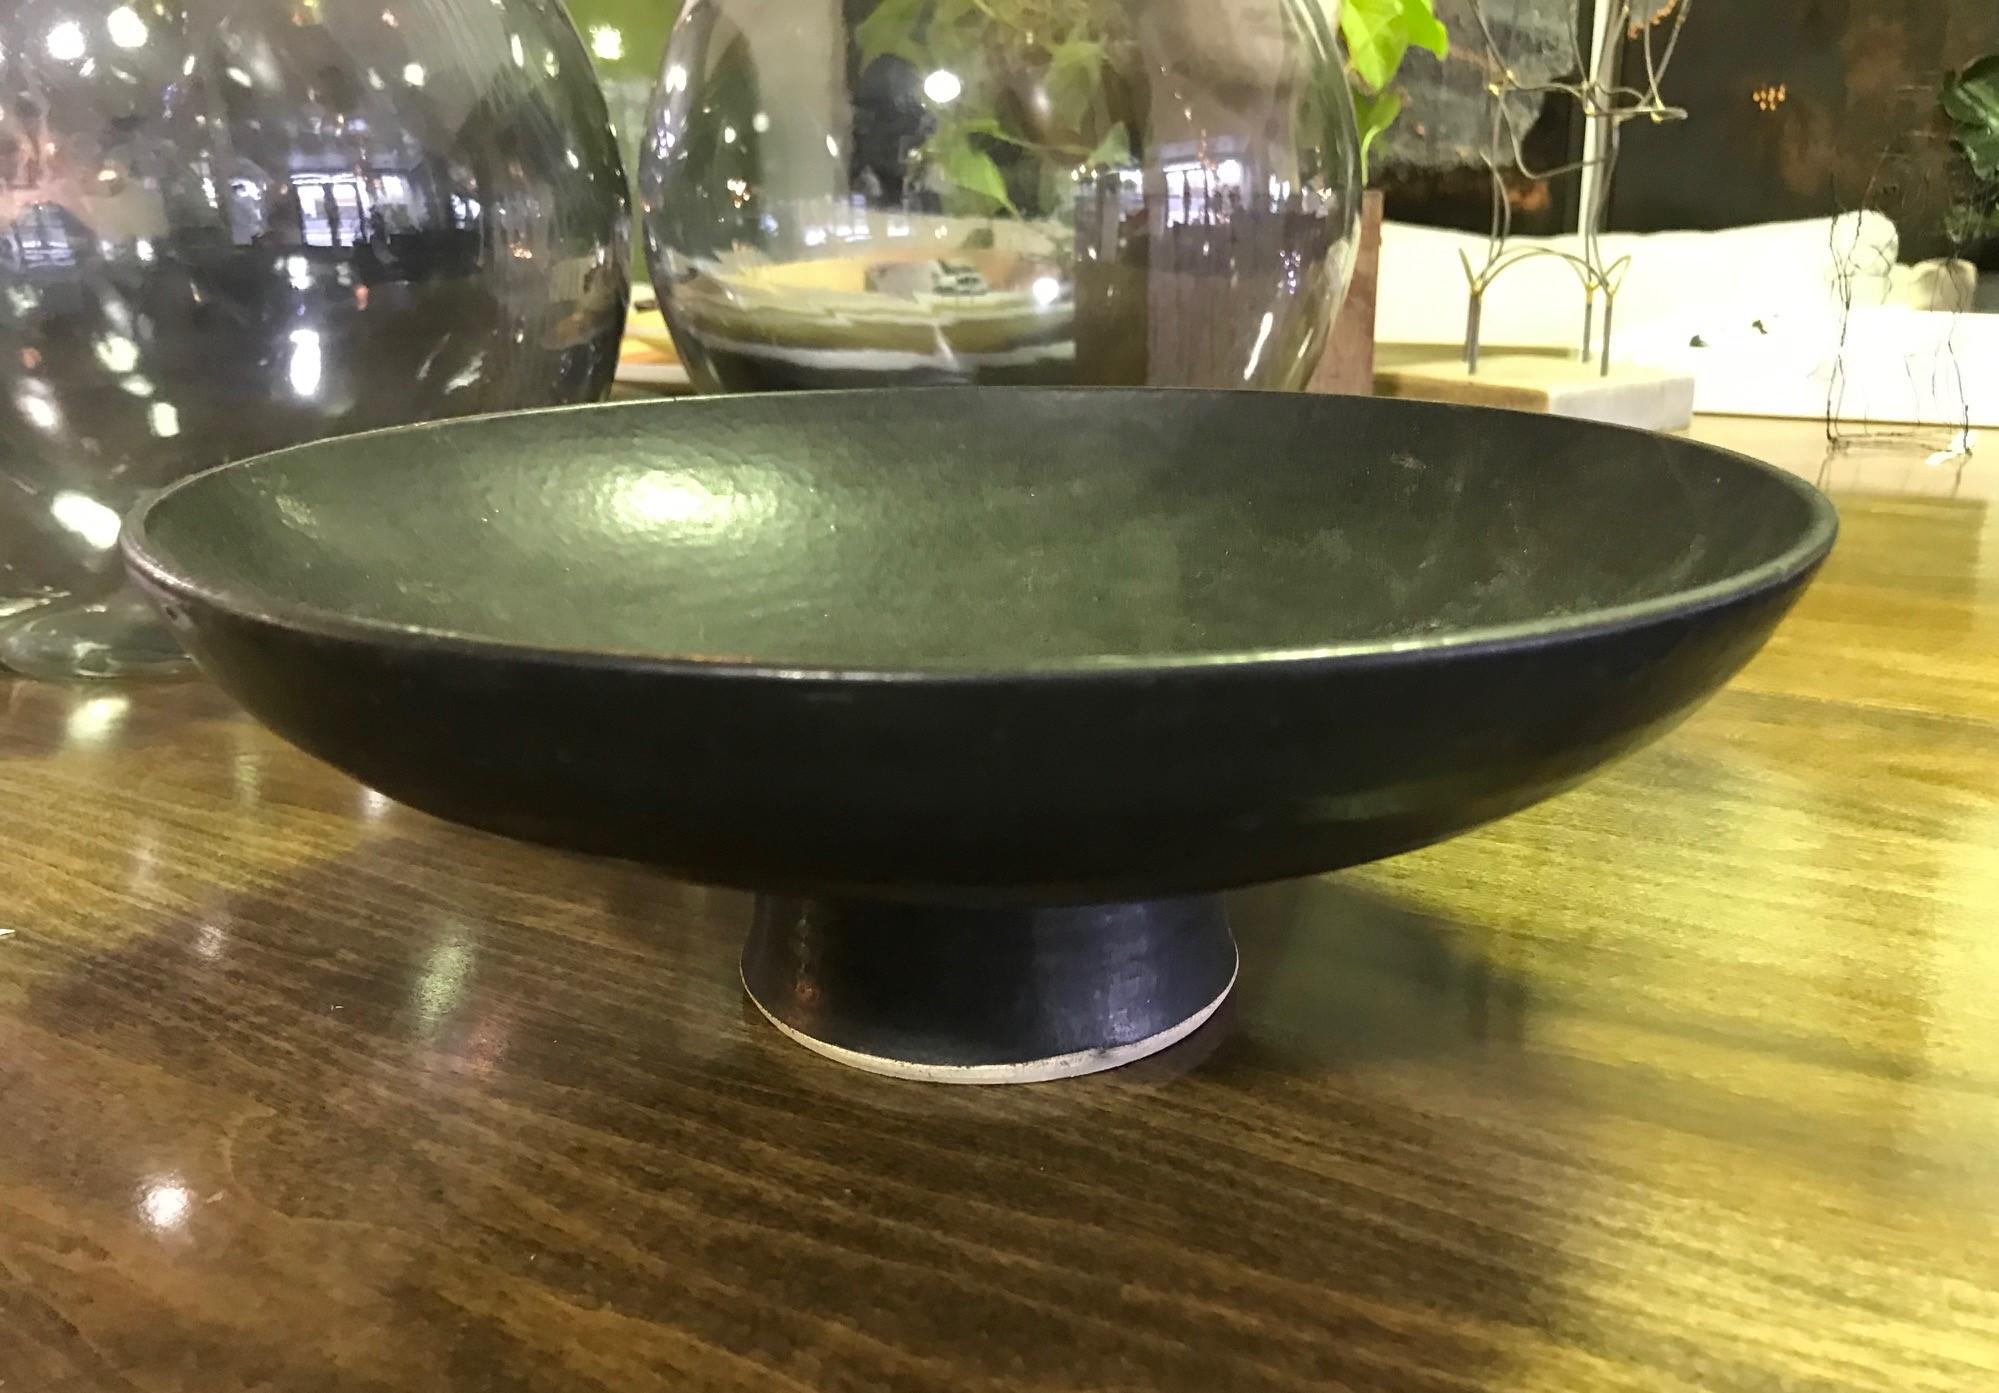 A splendid, darkly glazed large pedestal bowl by renowned American potter Laura Andreson. Gorgeous in its modern design and rich, black color.

Signed and dated (1954) on the base by Andreson.

Would be a great addition to any midcentury